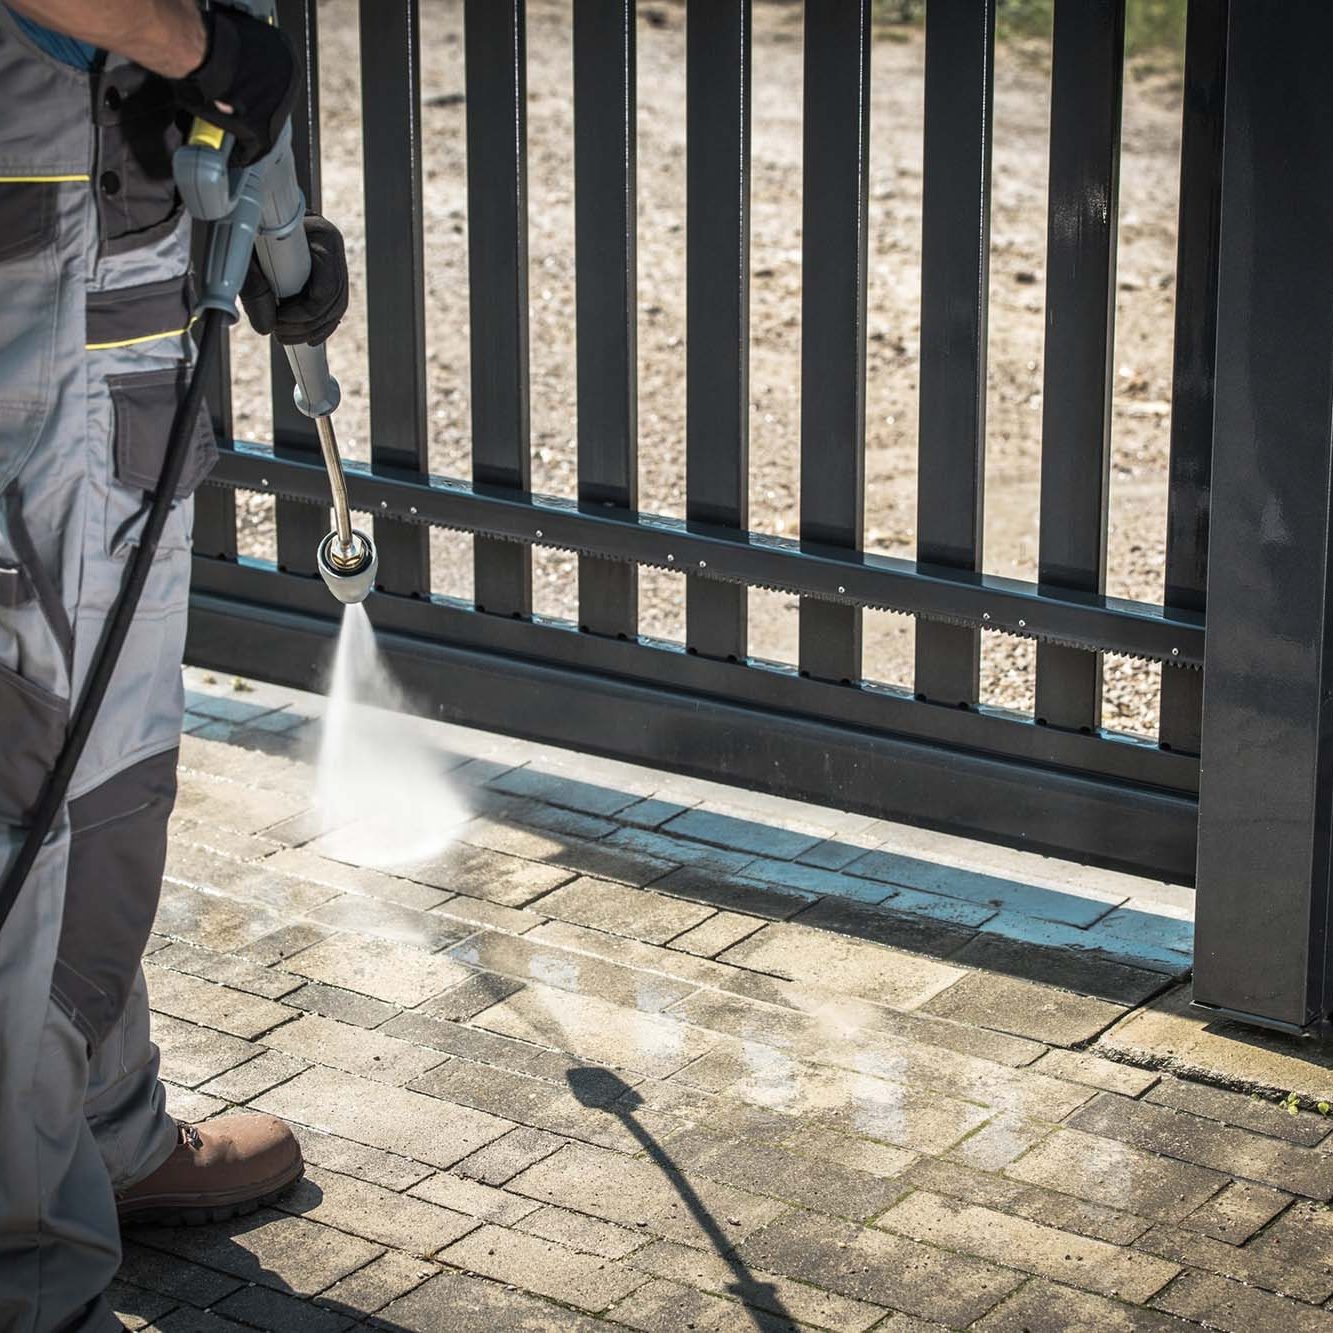 Power Washing Garden Cobble Stone Paths. Outdoor Cleaning Using Pressure Washer. Closeup Photo.